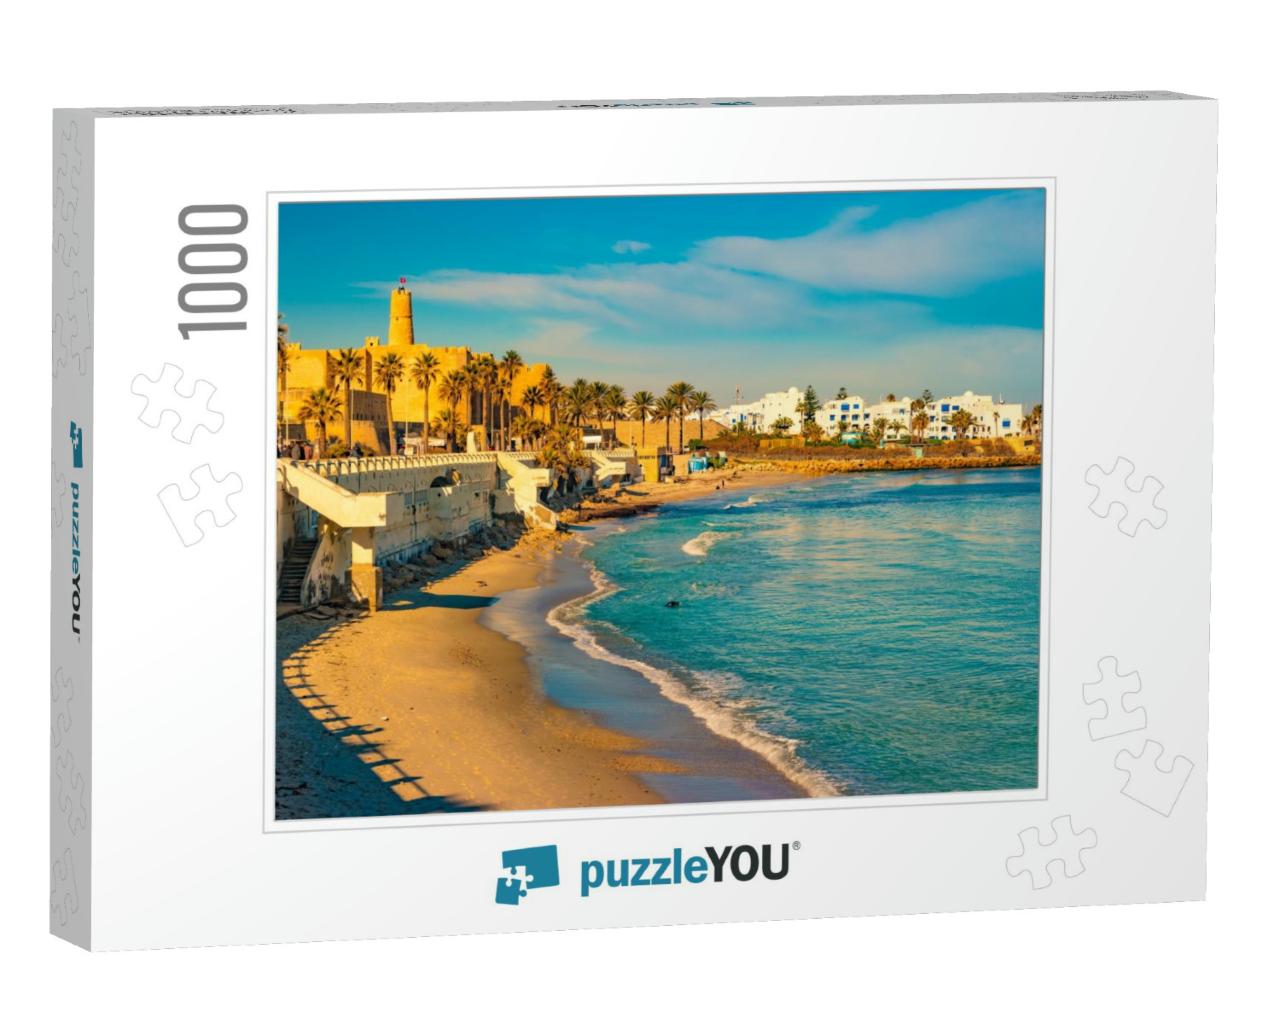 Monastir in Tunisia is an Ancient City & Popular Tourist... Jigsaw Puzzle with 1000 pieces